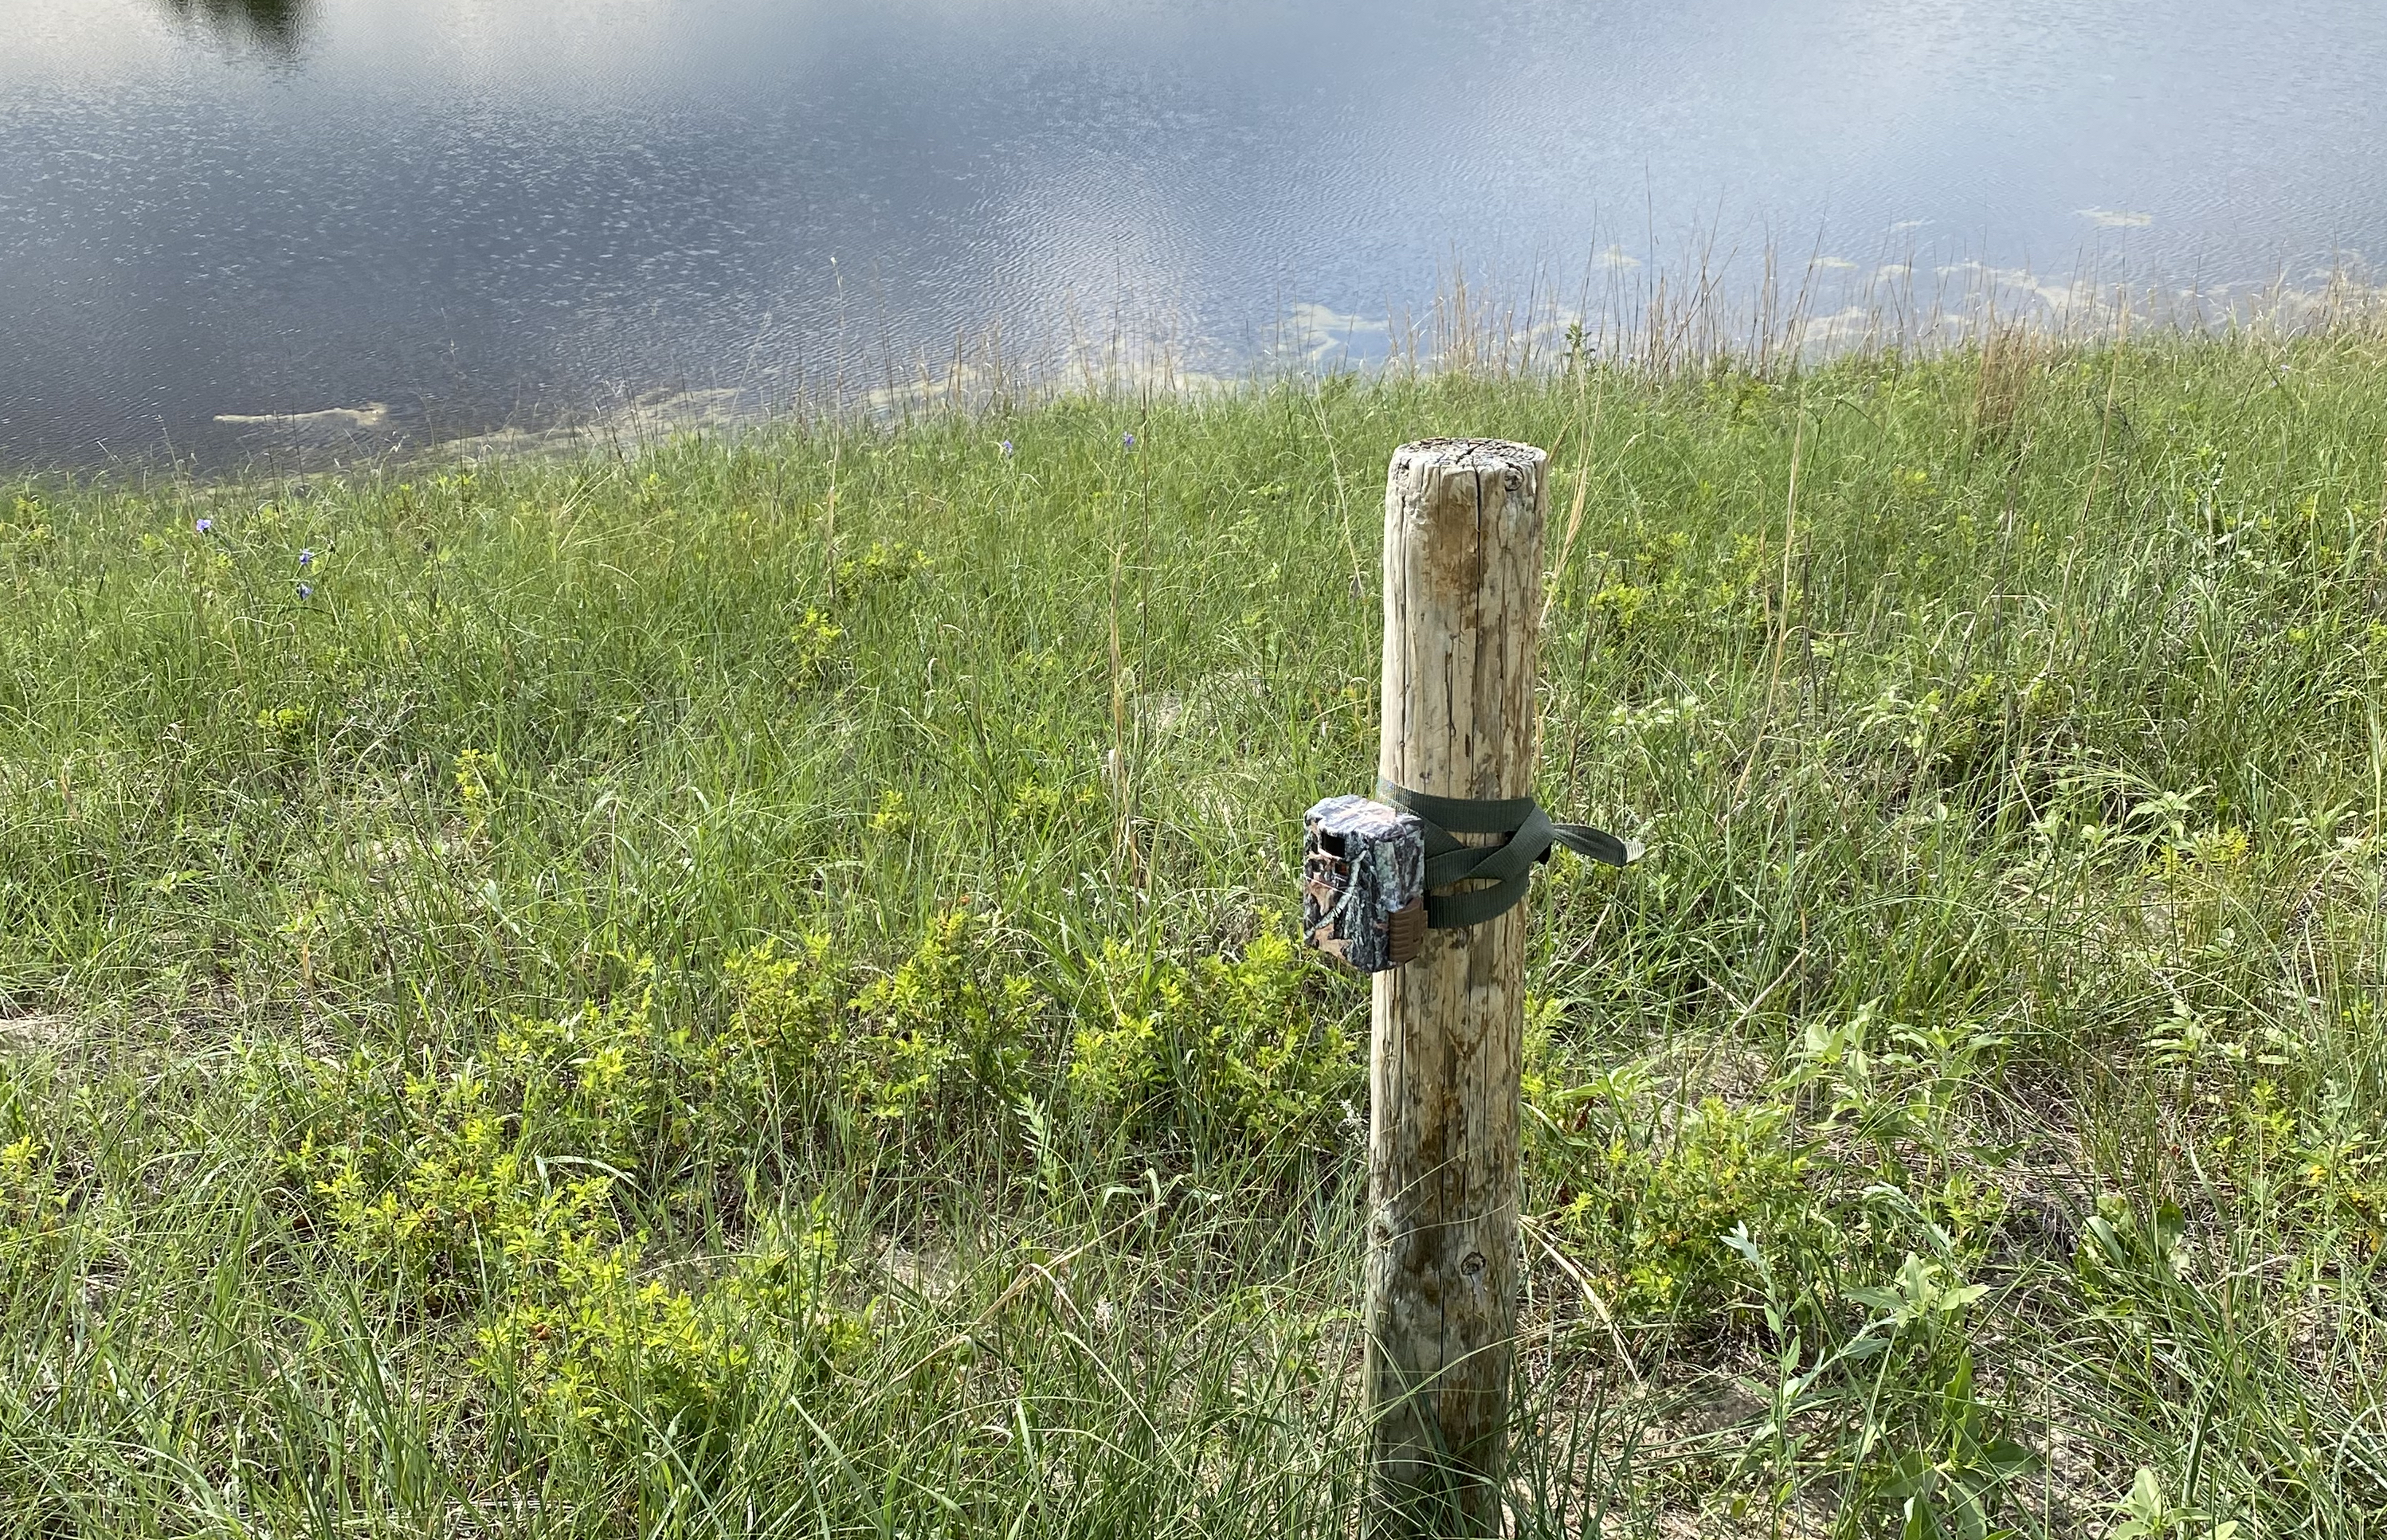 A game camera is set up on a wooden post in a Sandhills area pasture. A lake can be seen in the background.